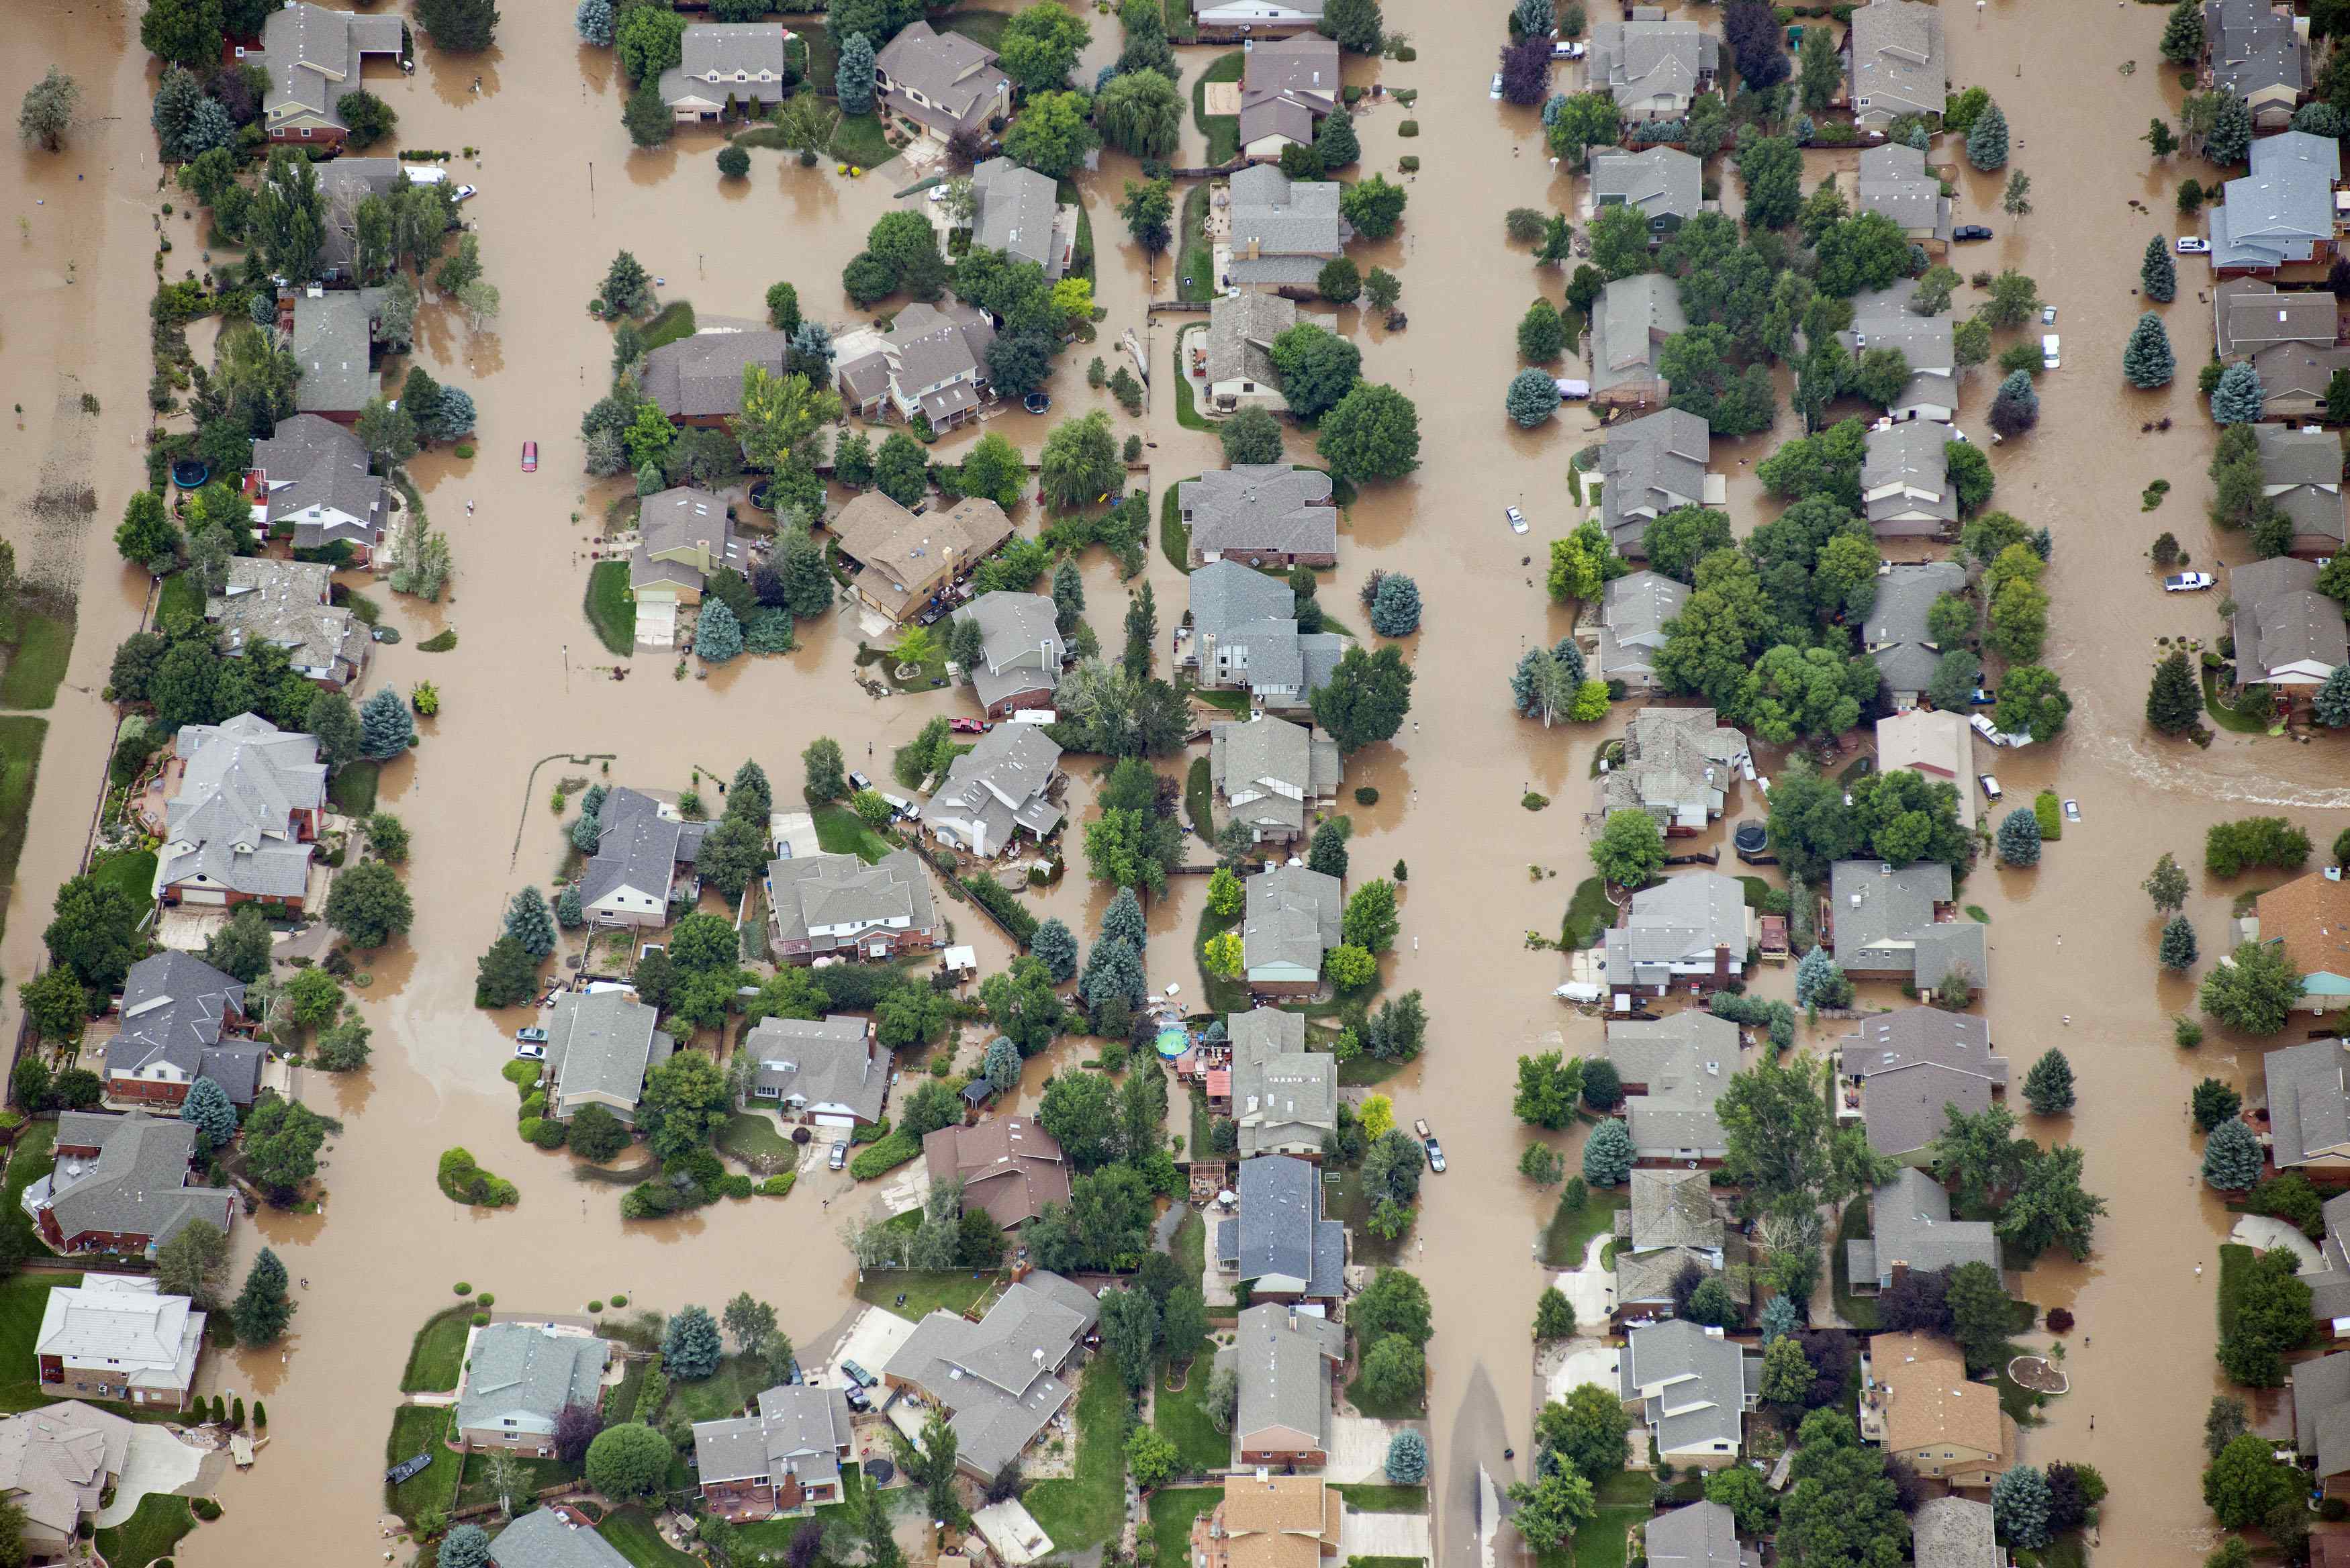 Fifth fatality feared in Colorado floods as towns evacuated